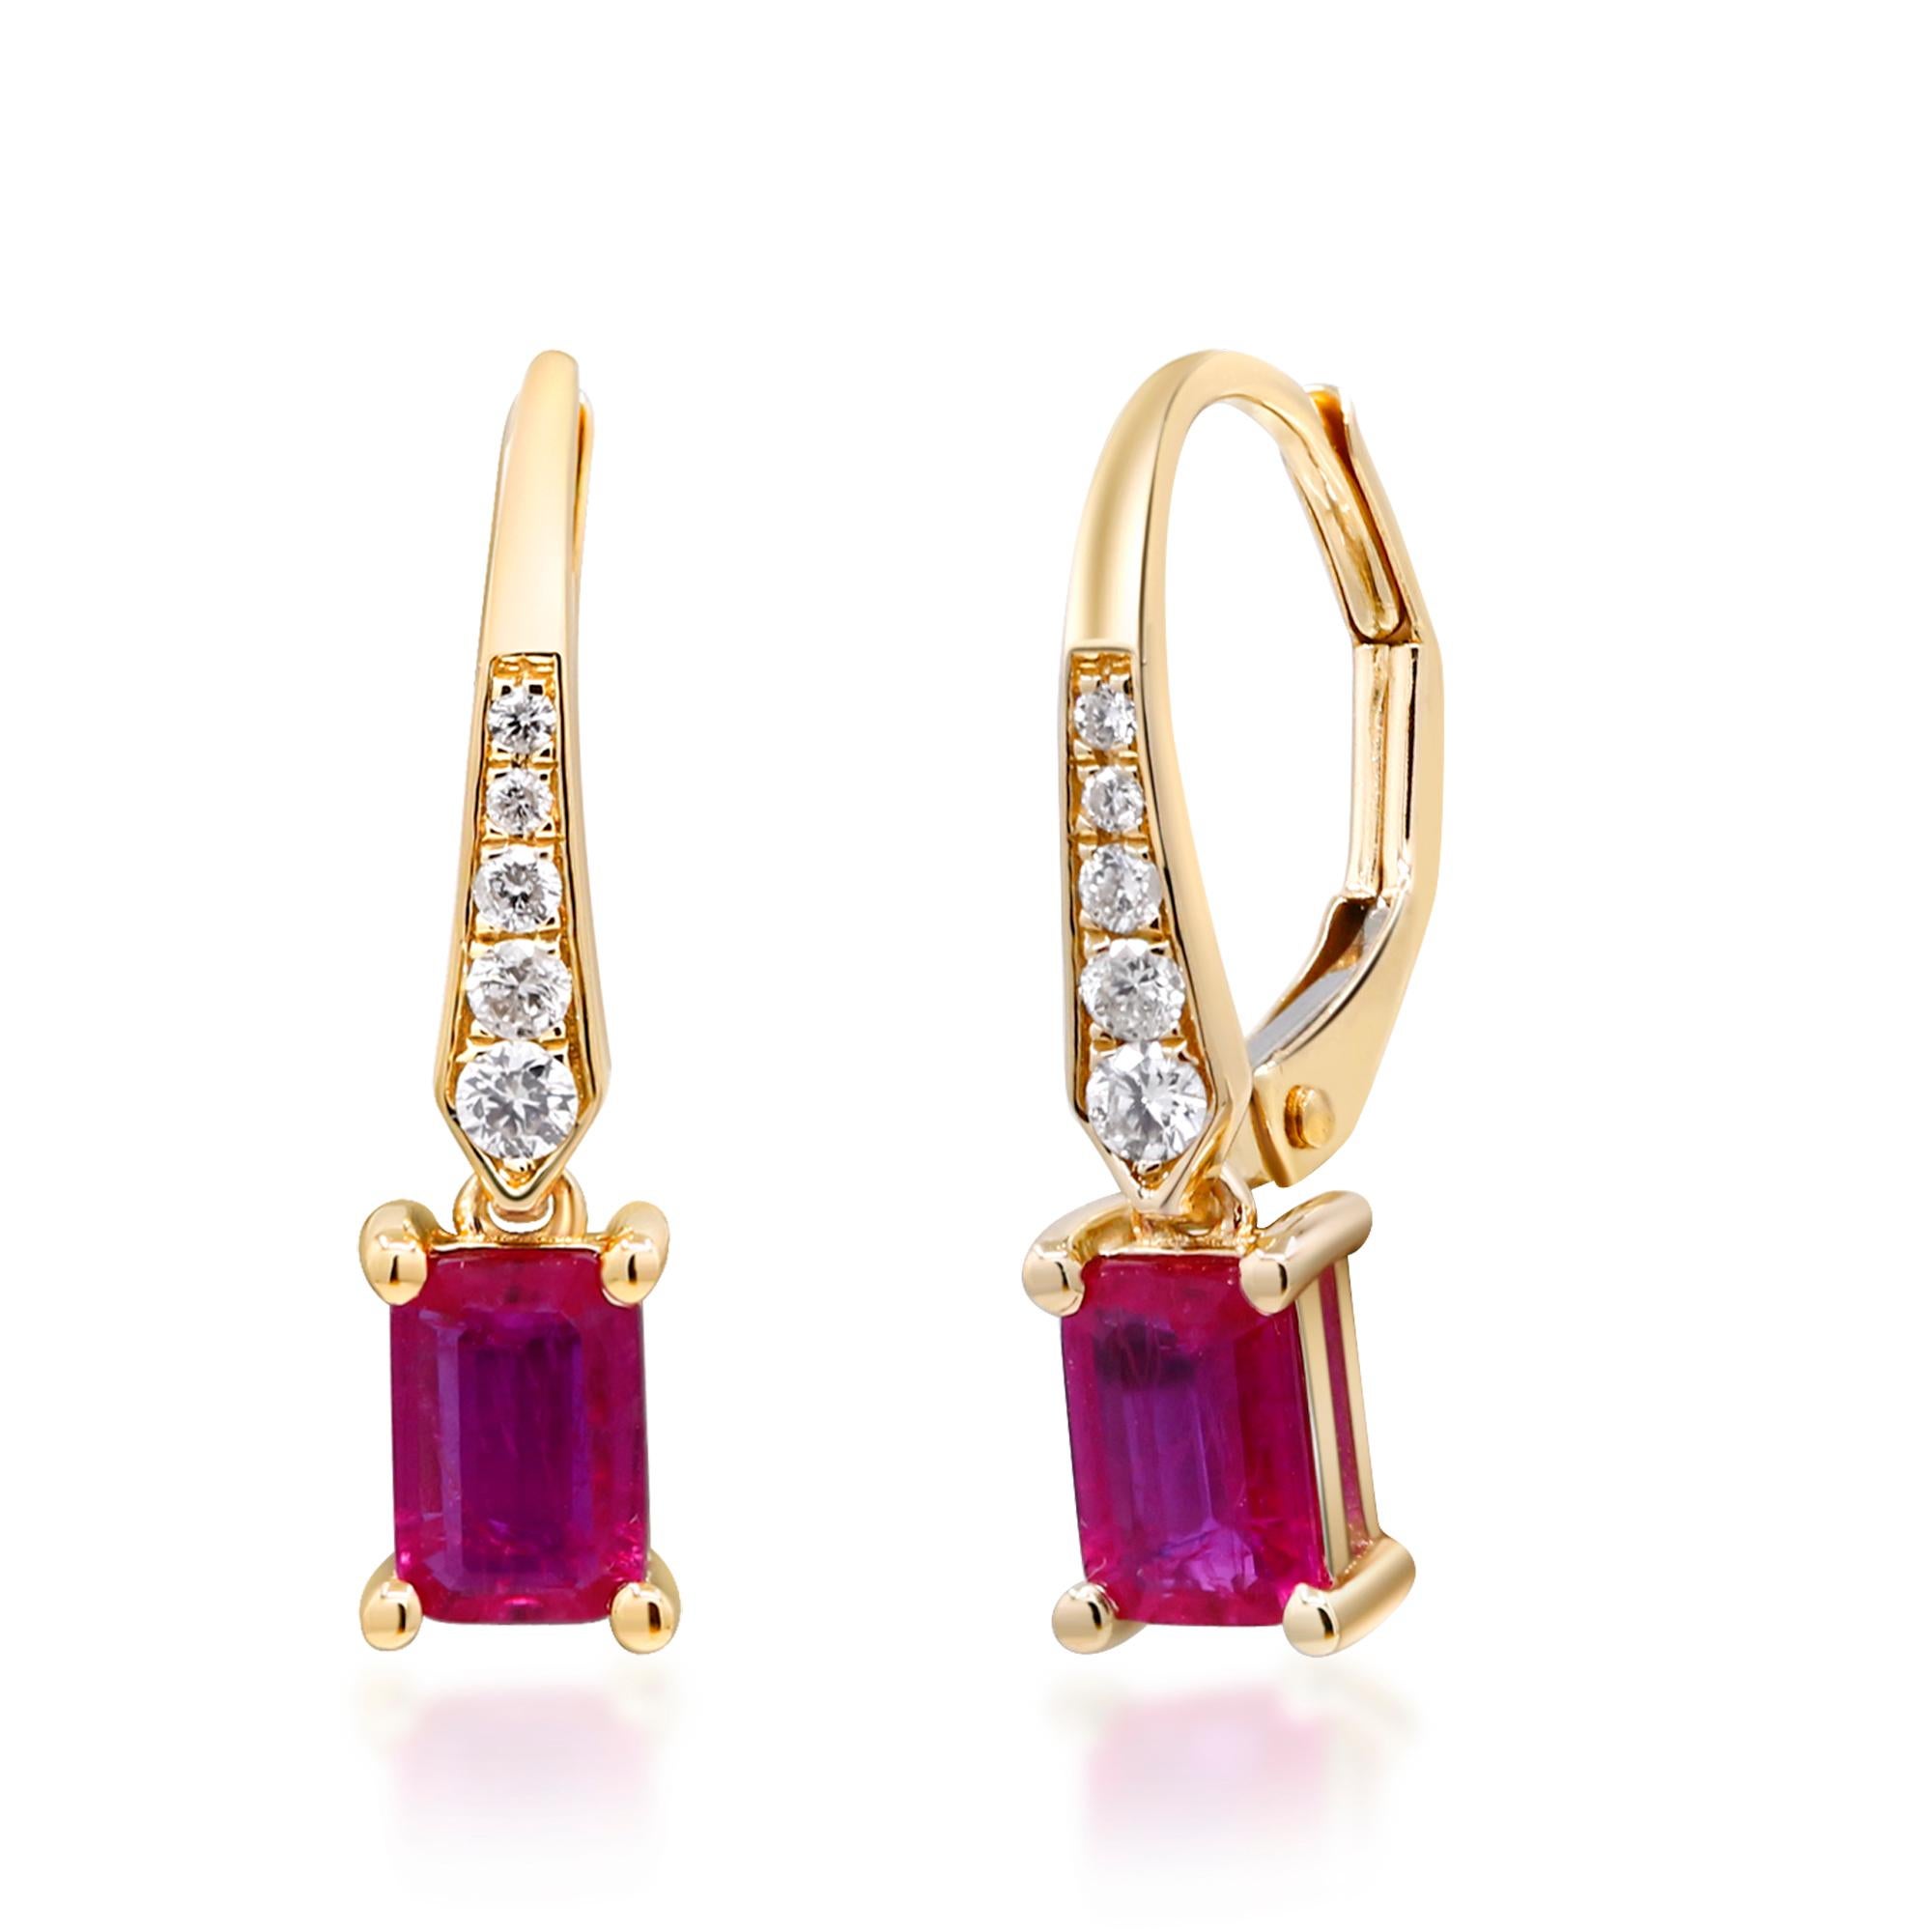 Decorate yourself in elegance with this Earring is crafted from 14-karat Yellow Gold by Gin & Grace Earring. This Earring is made up of 6x4 Emerald-cut (2 pcs) 1.14 carat Ruby and Round-cut White Diamond (10 pcs) 0.14 carat. This Earring is weight